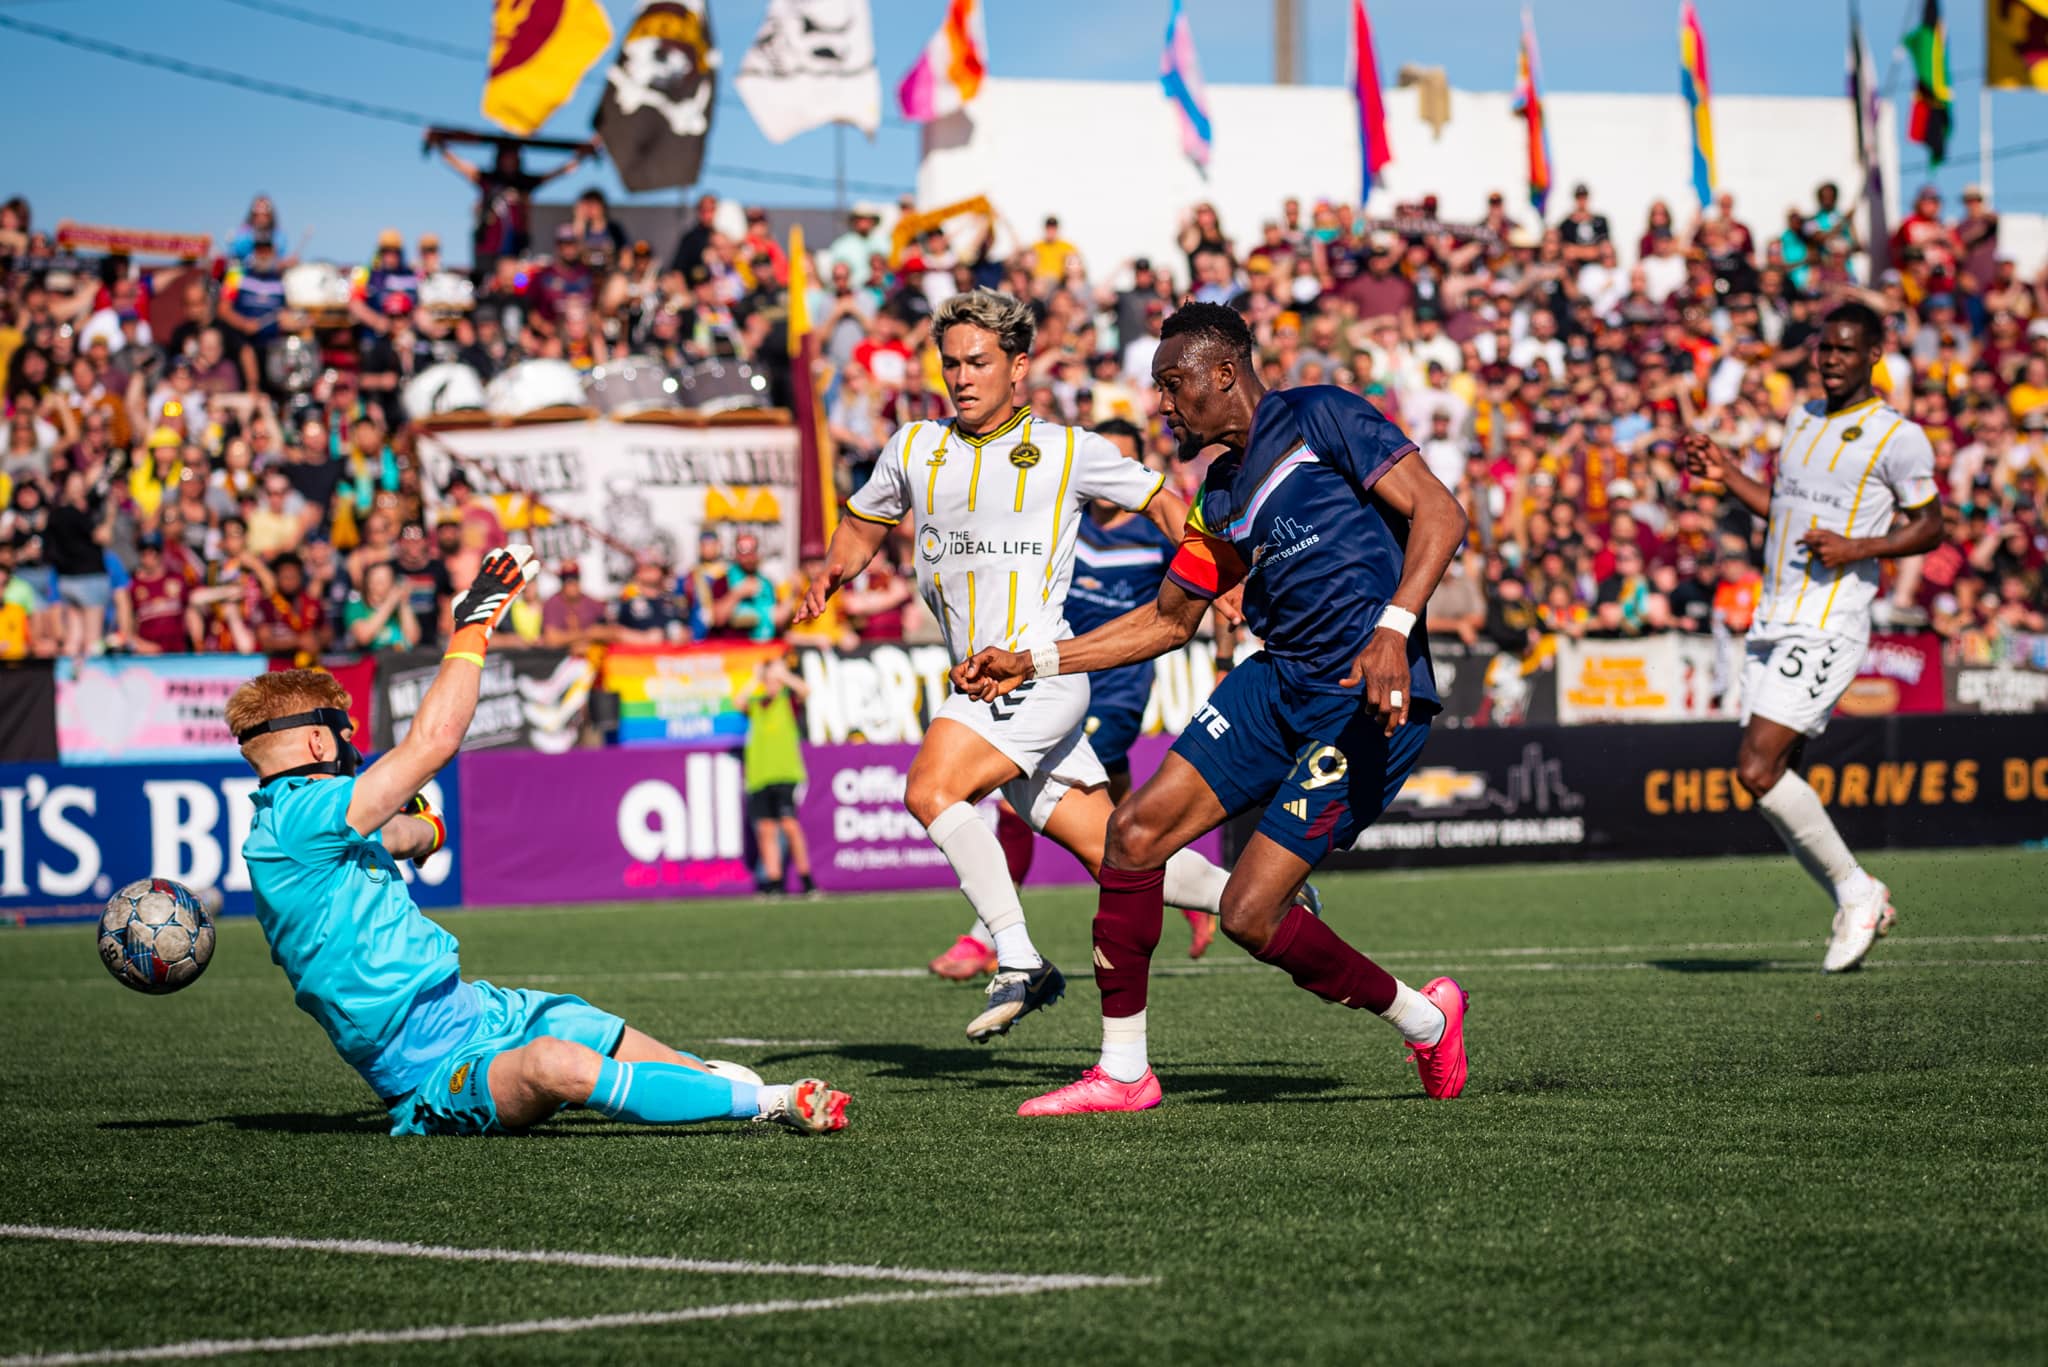 Elvis Amoh shines as Detroit City FC secures 2-0 victory over Charleston Battery